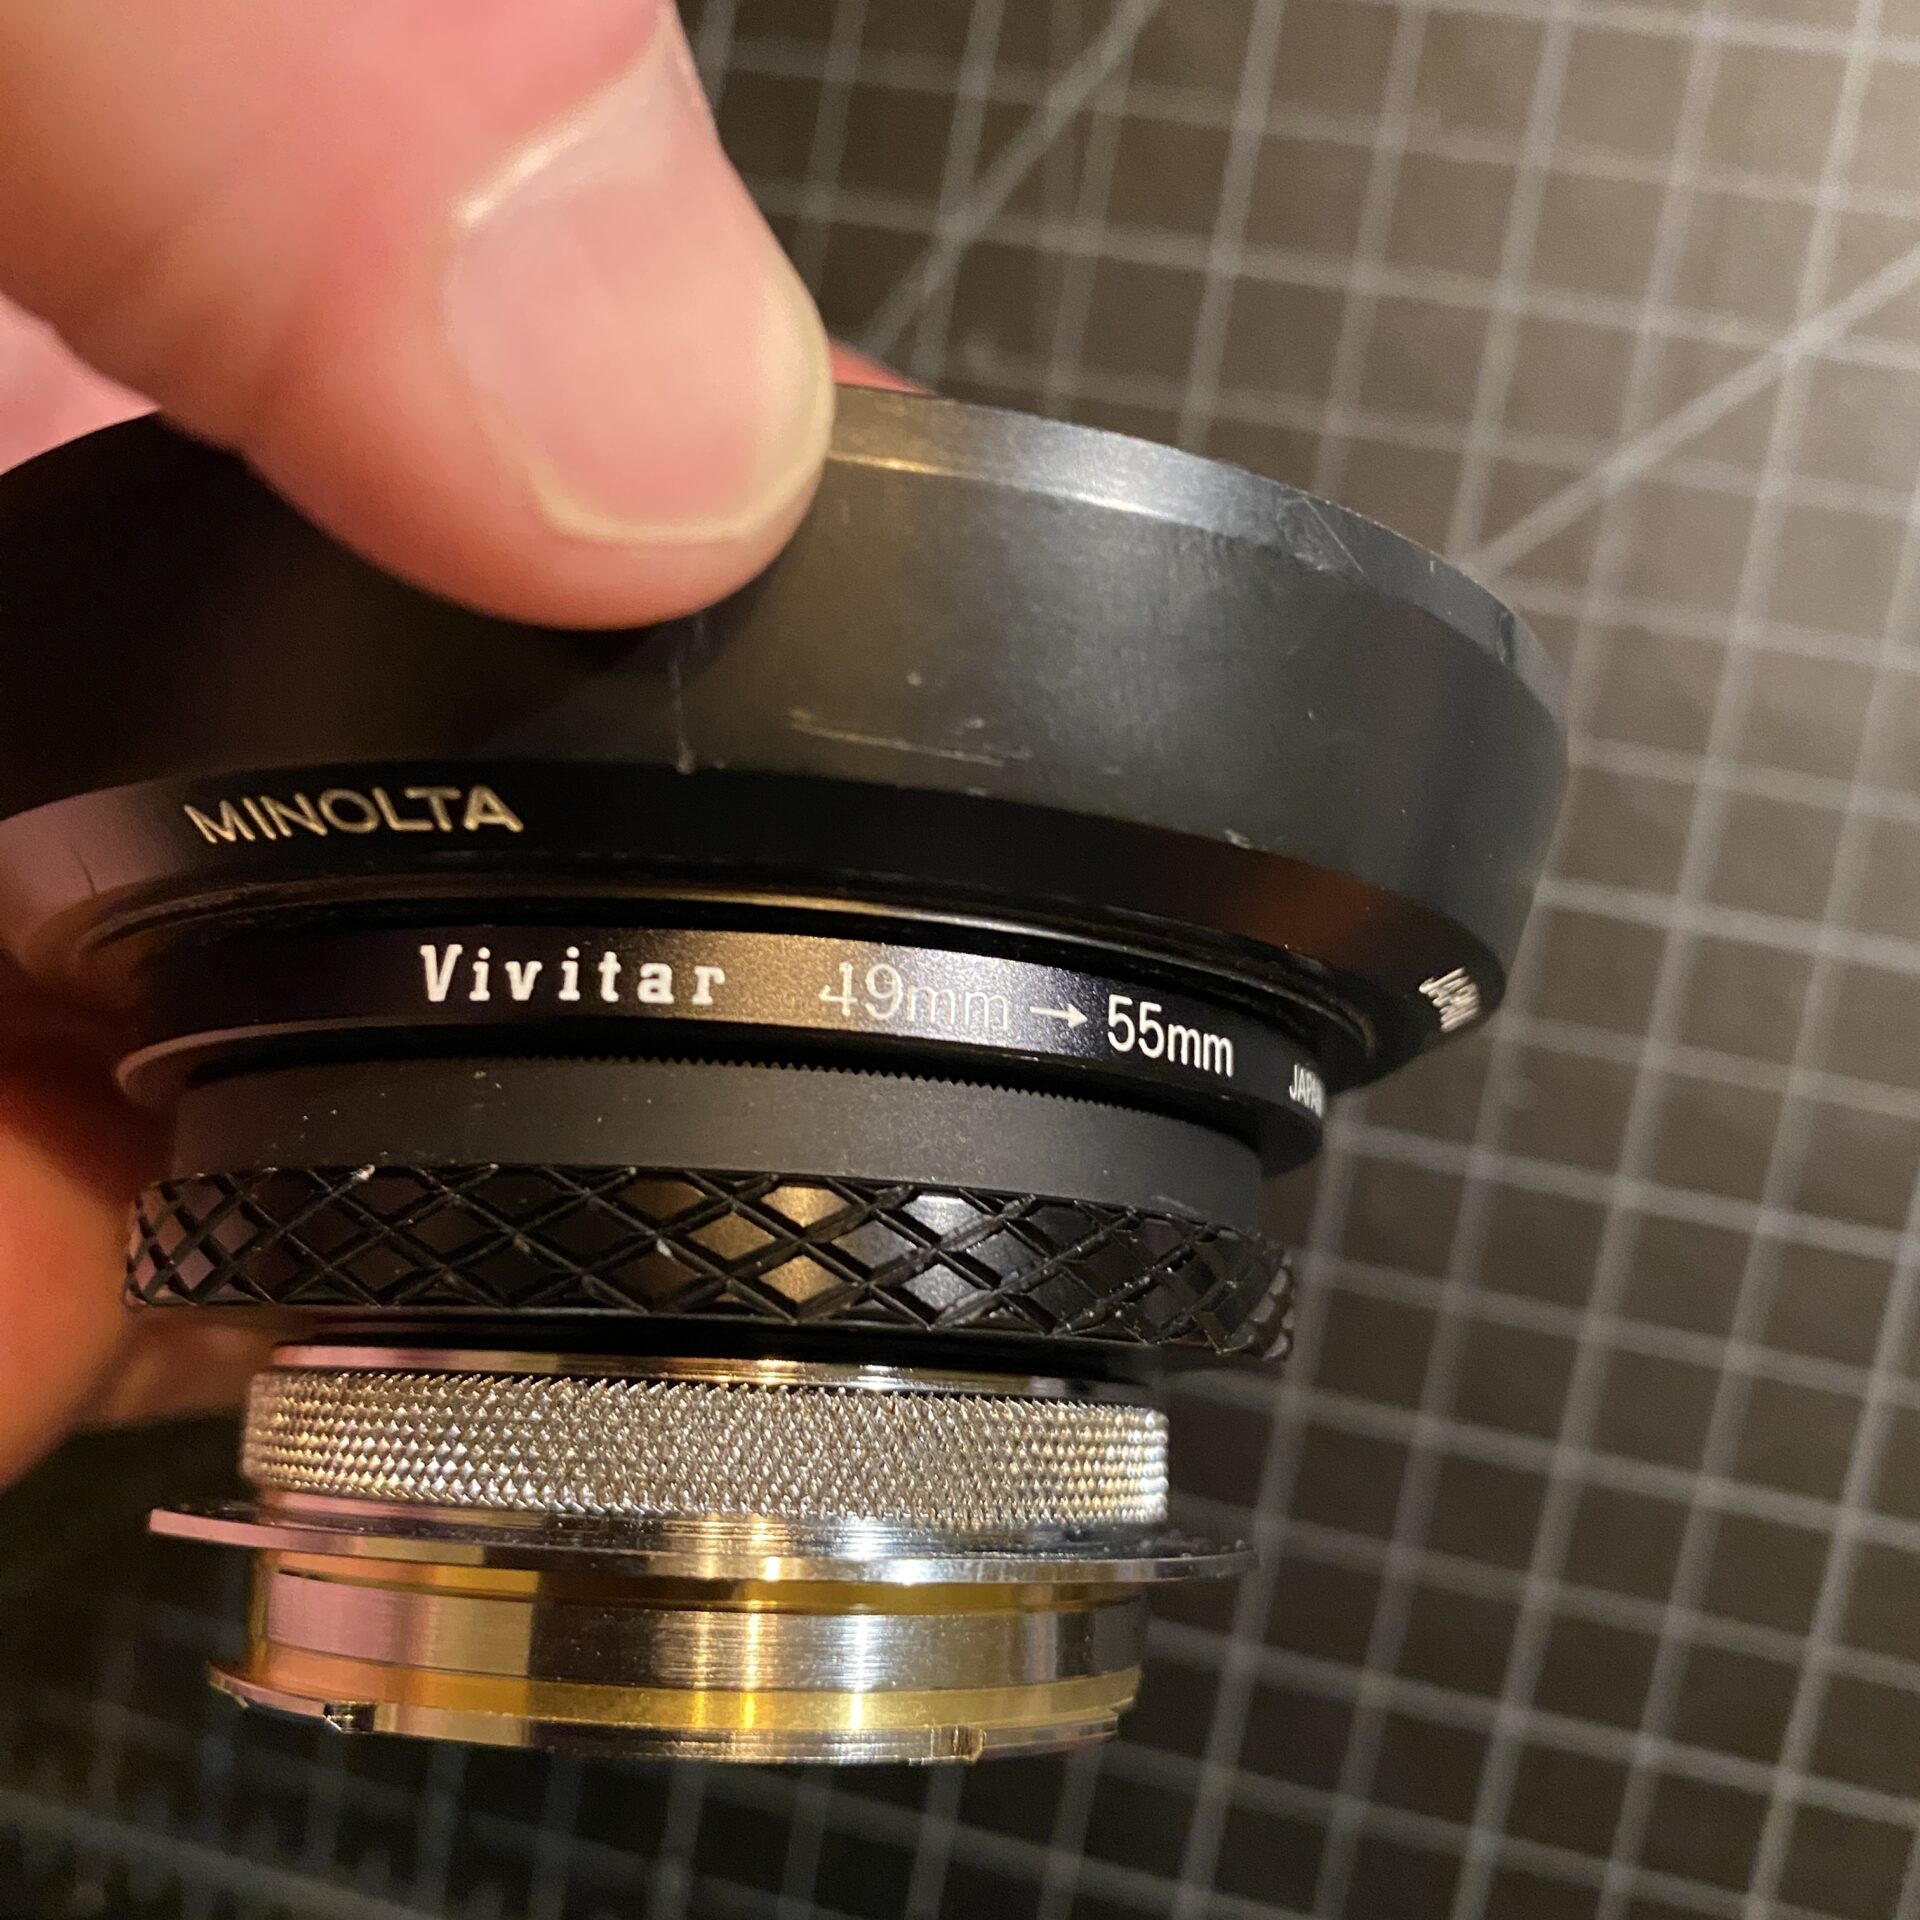 A photo of a lens with a lens hood